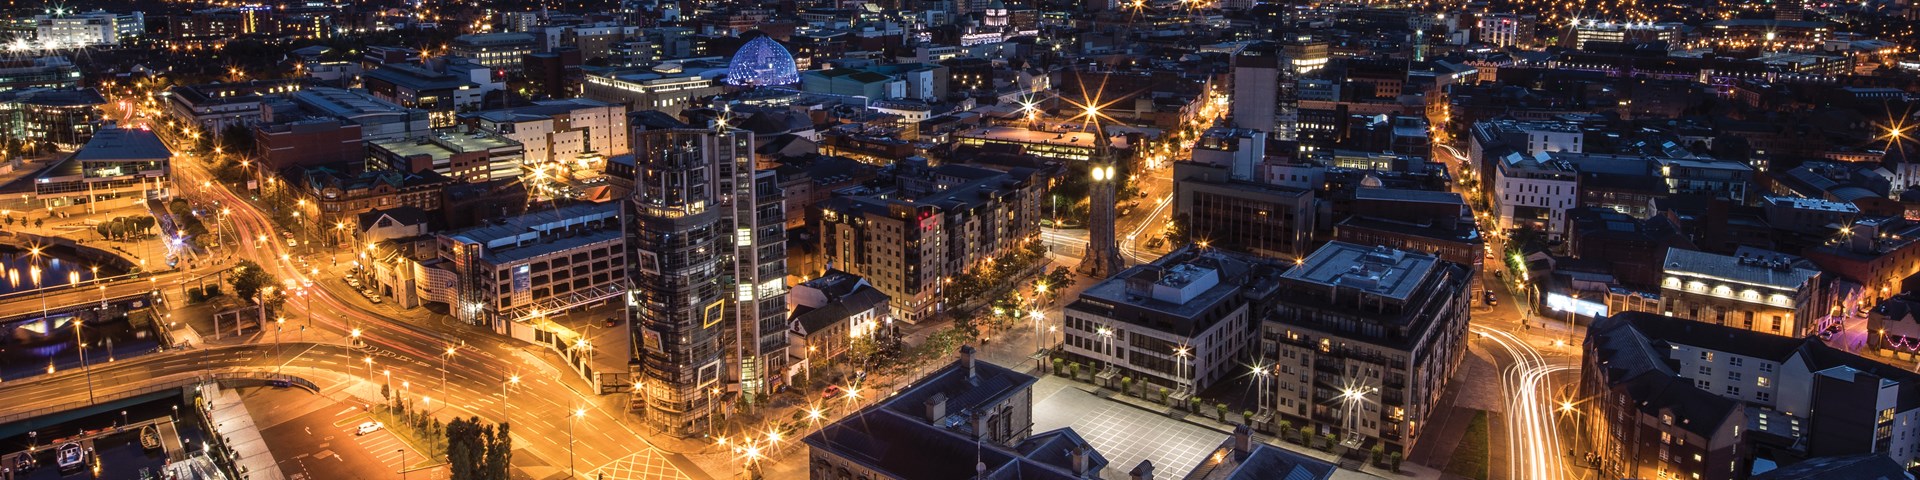 aerial view of Belfast at night